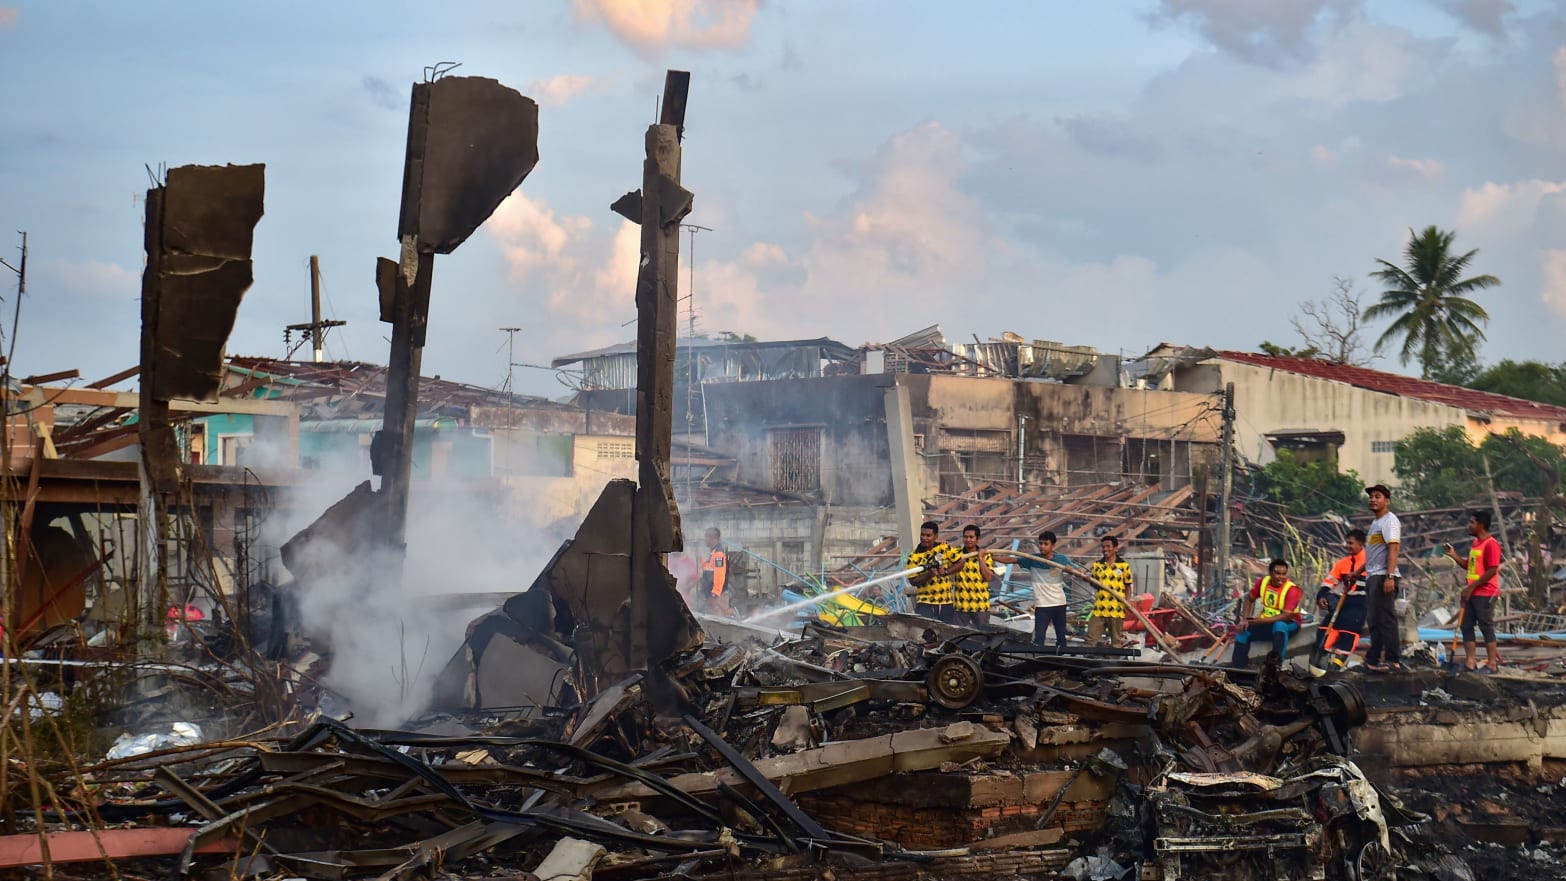 Thai firefighters put out embers around destroyed homes after an explosion ripped through a firework warehouse, killing nine people and injuring more than 100, in Sungai Kolok district in the southern Thai province of Narathiwat on July 29, 2023.